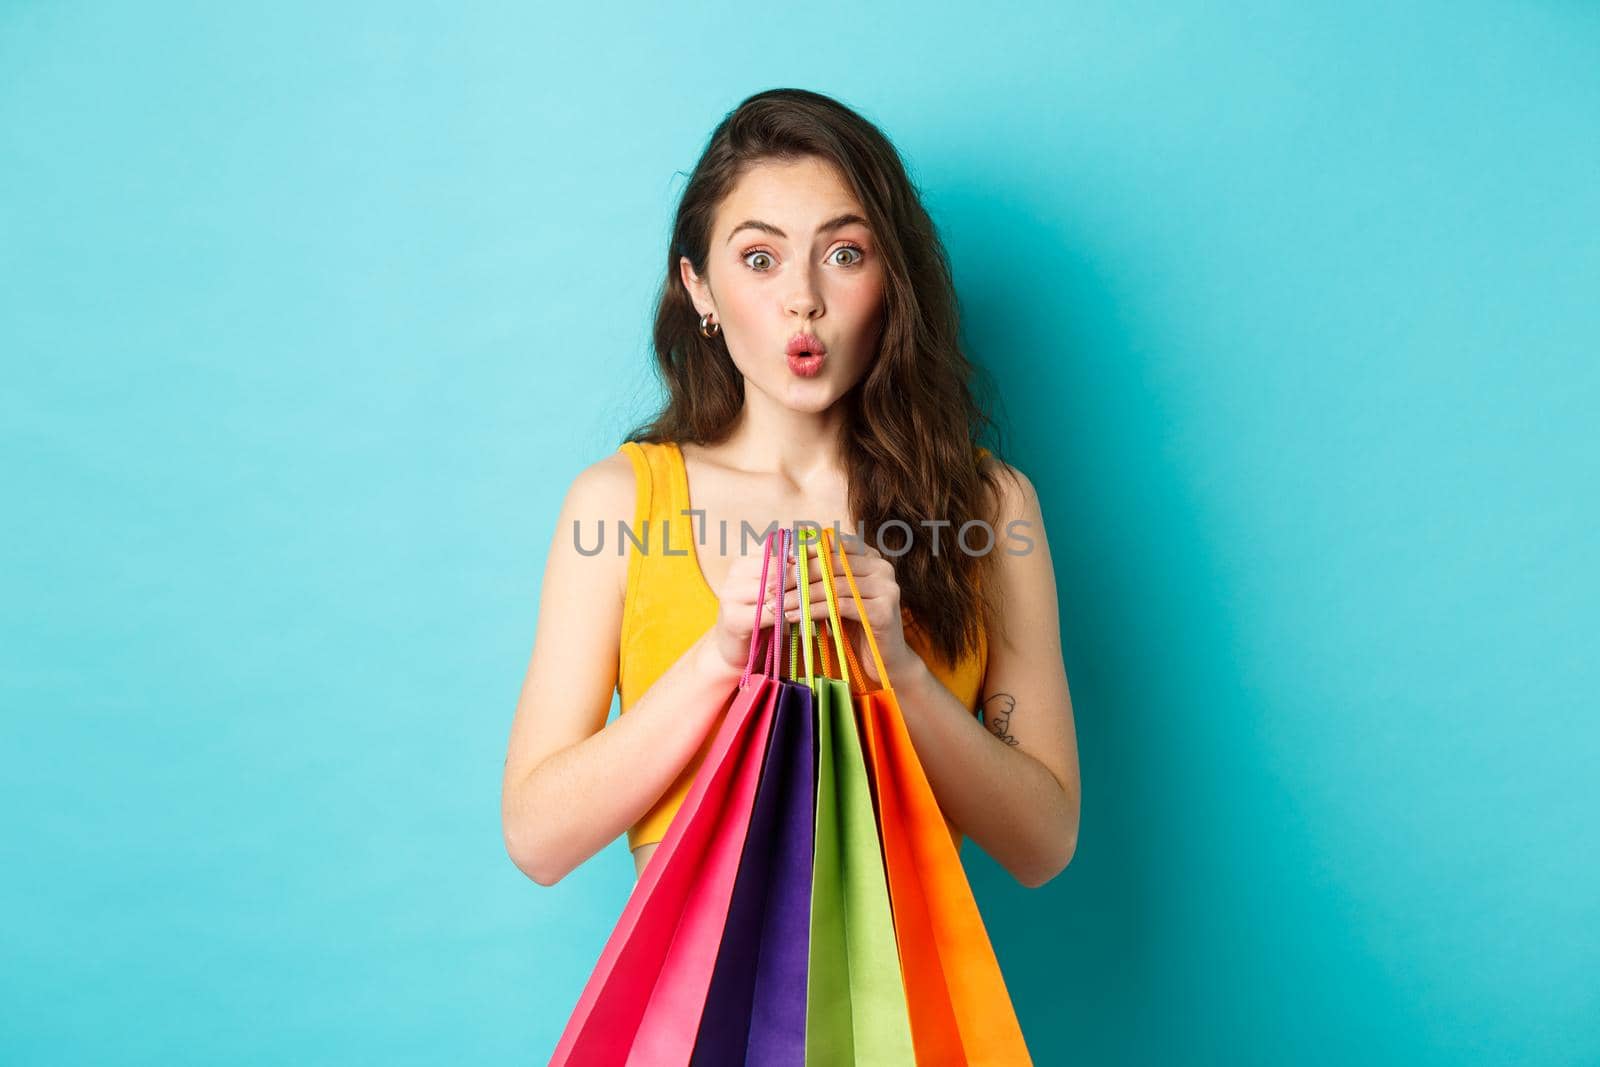 Young attractive woman looks intrigued at promo deal, holding shopping bags with goods, standing over blue background. Copy space